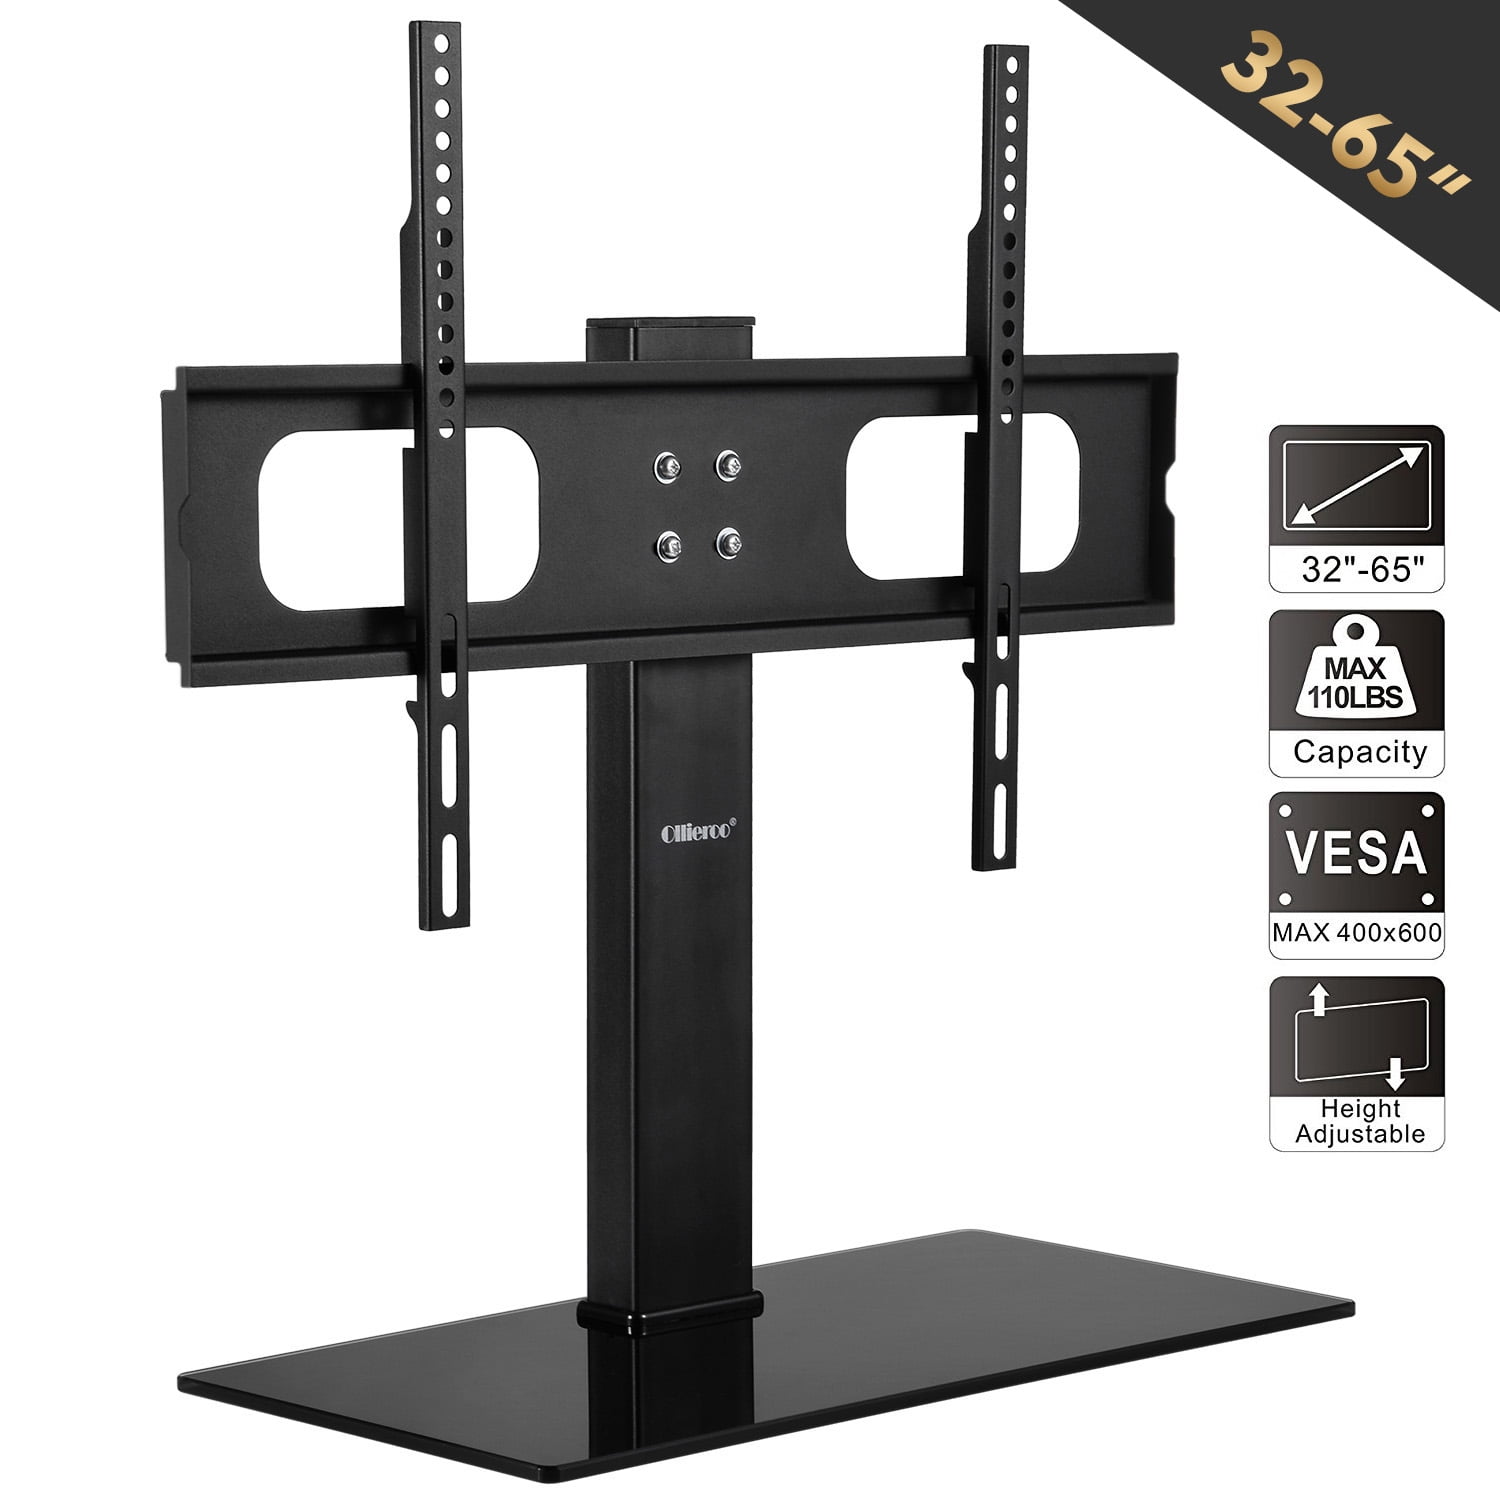 Details about   Universal Swivel TV Stand Tabletop TV Stand Base for 32-65 inch TVs 